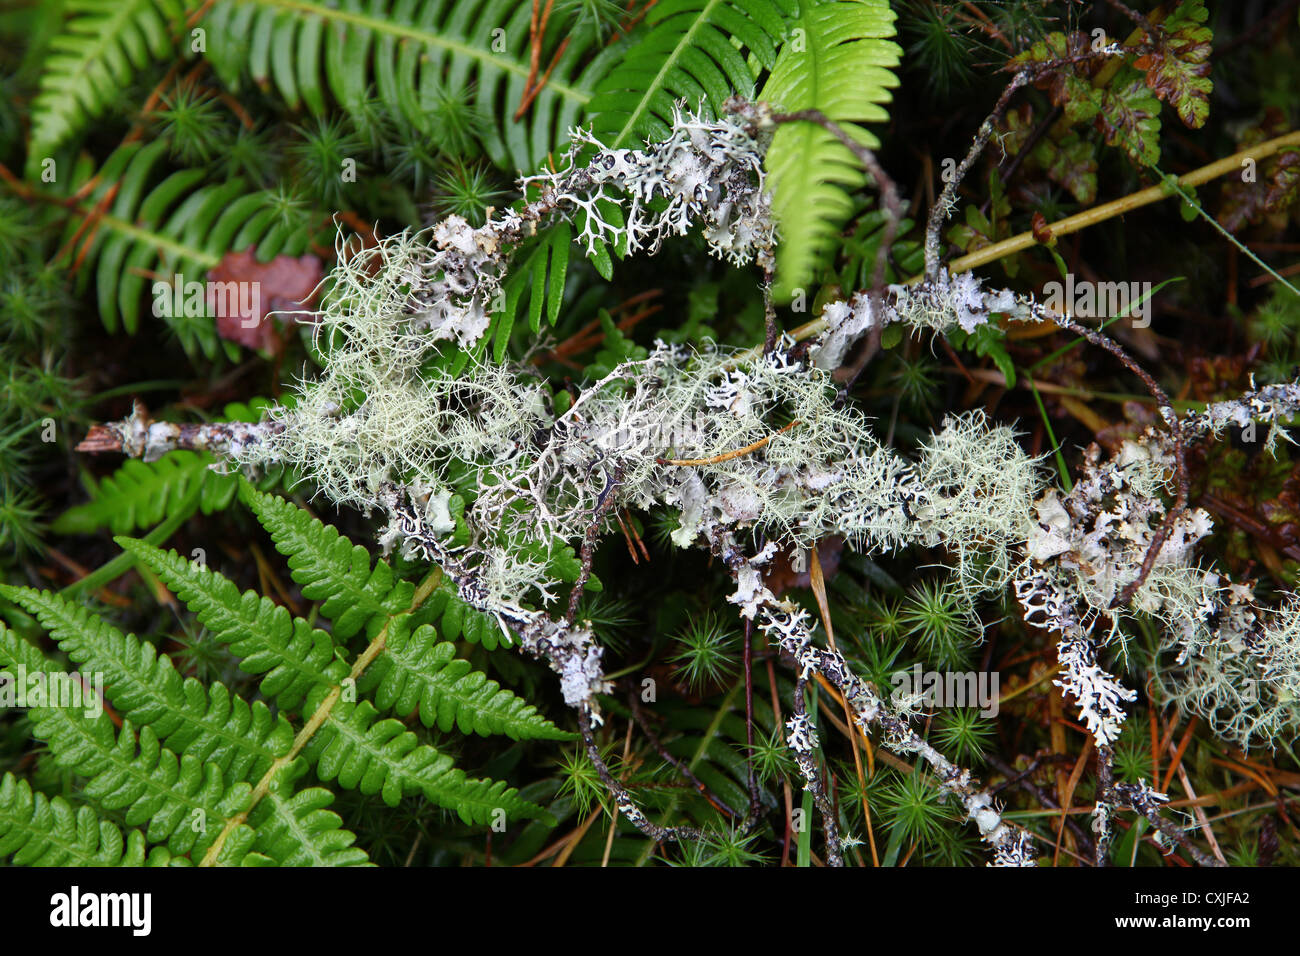 Foliose and fruticose lichens growing on a small tree branch, England, UK Stock Photo